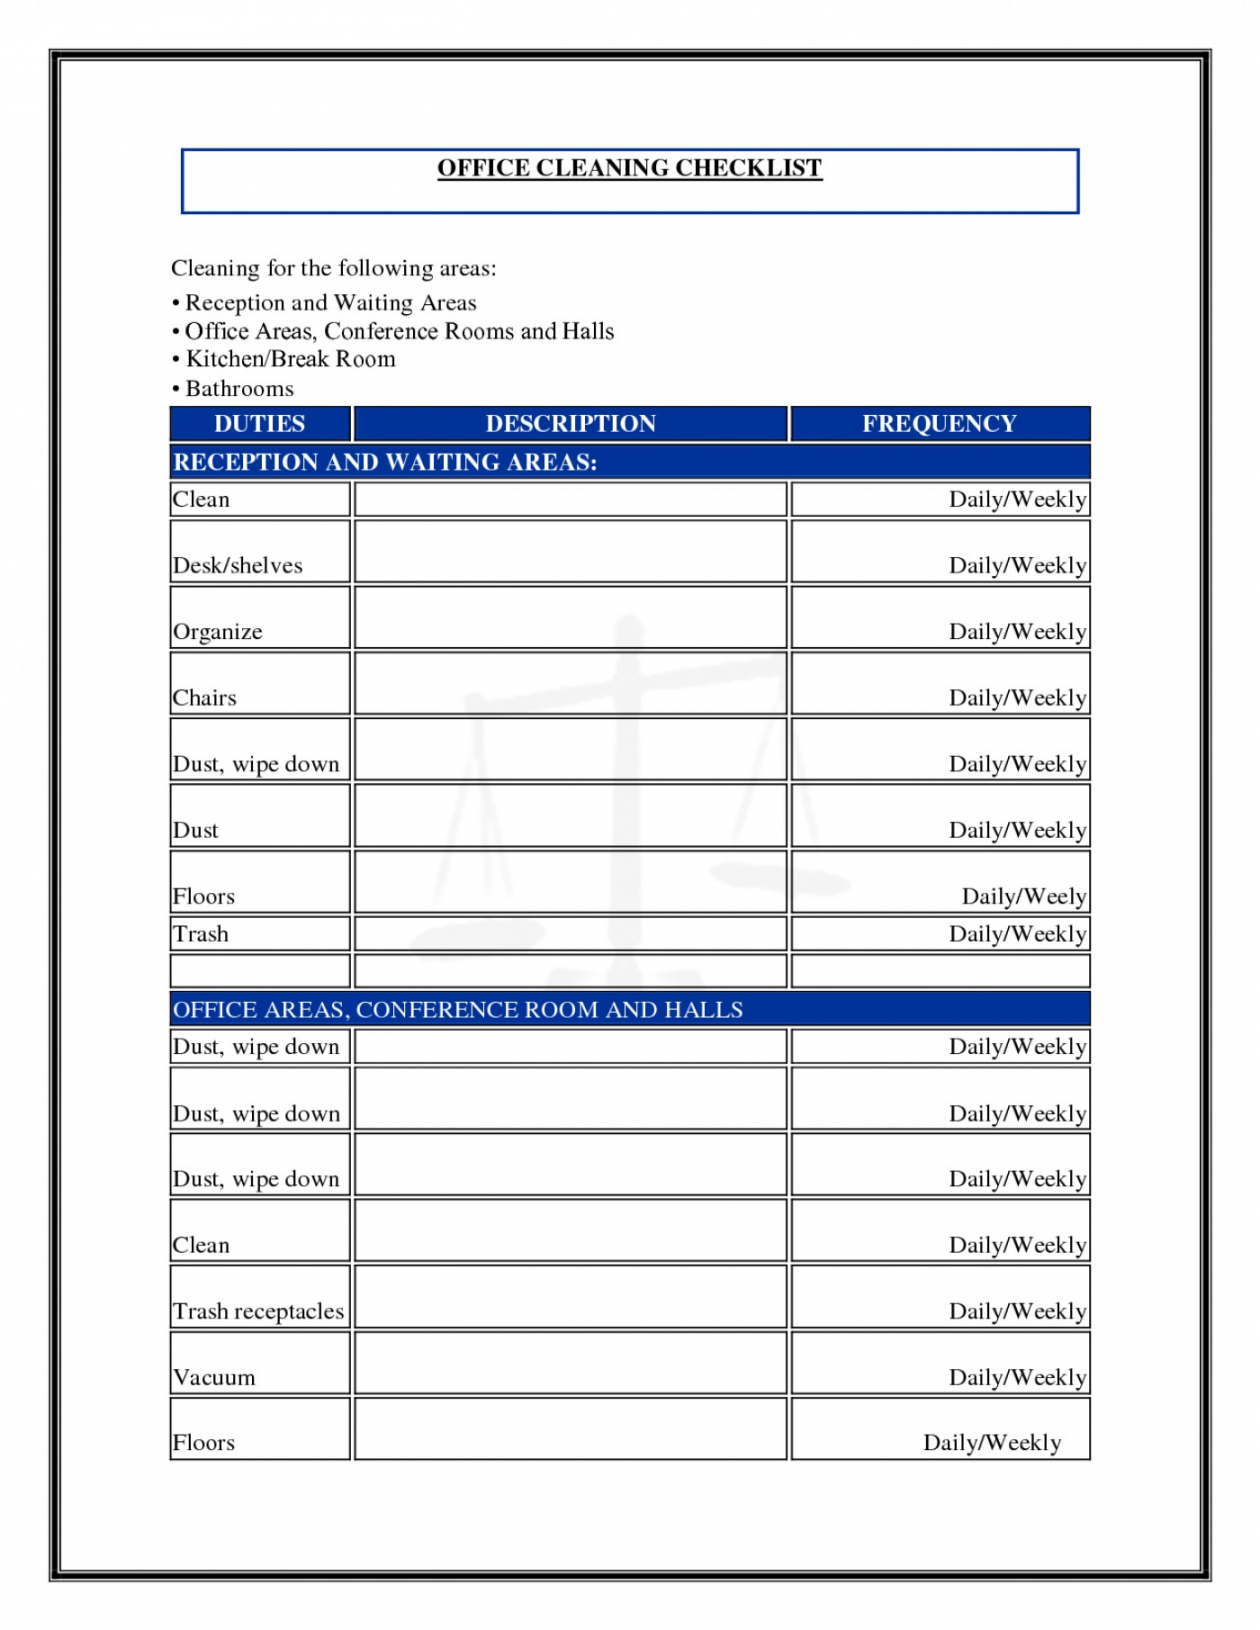 office schedule template ideas business personal daily cleaning office move checklist template pdf